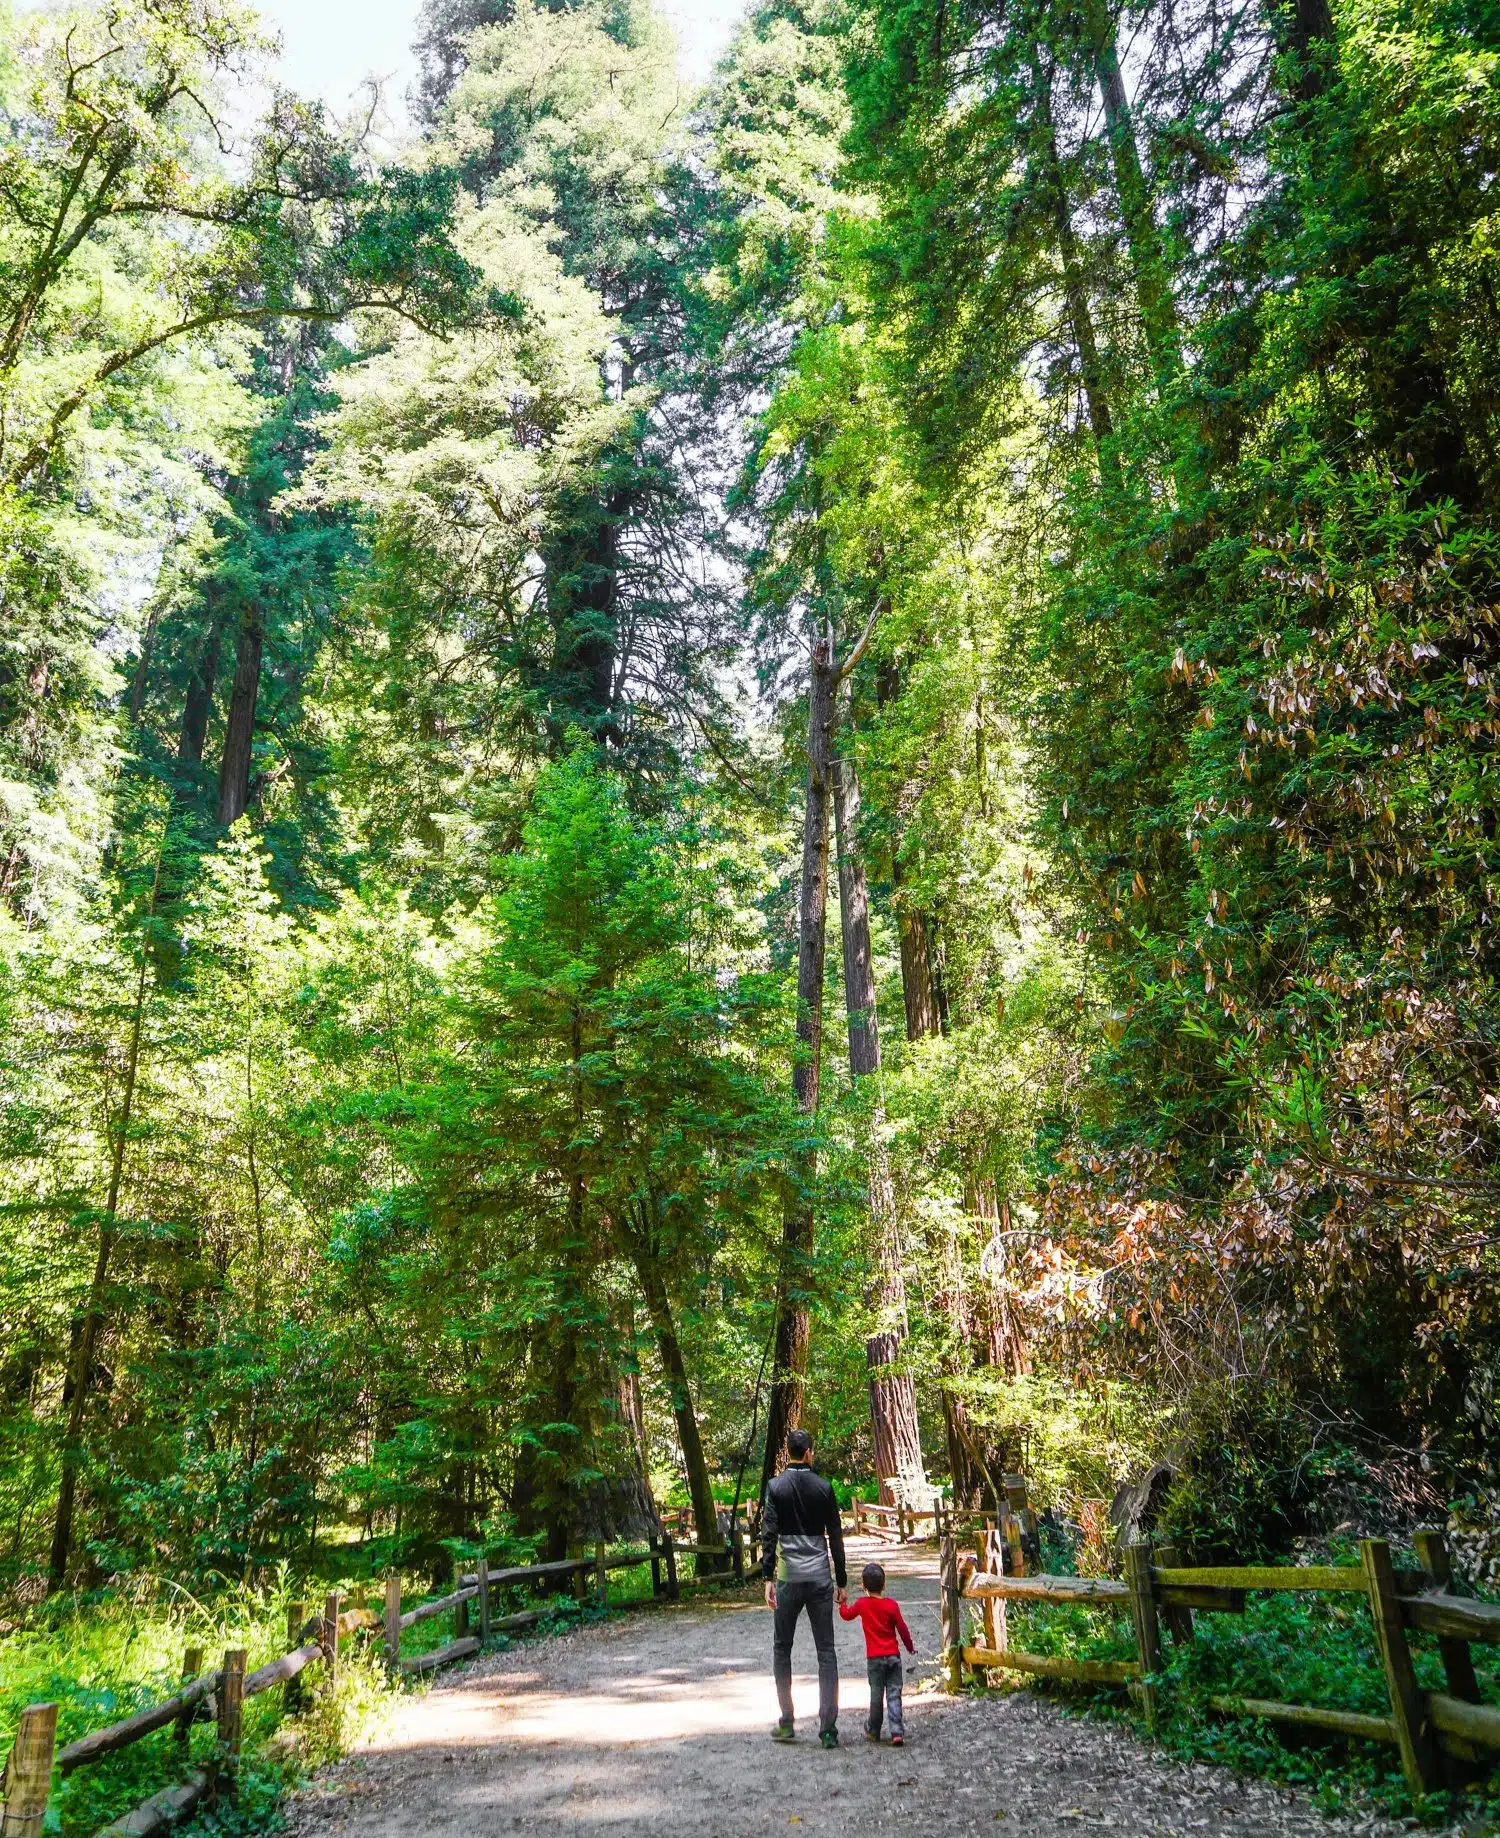 A California Redwoods Hike Near Santa Cruz, Ideal for Kids: The Redwood Grove Loop Trail in Henry Cowell State Park is the best day trip for CA family travel!